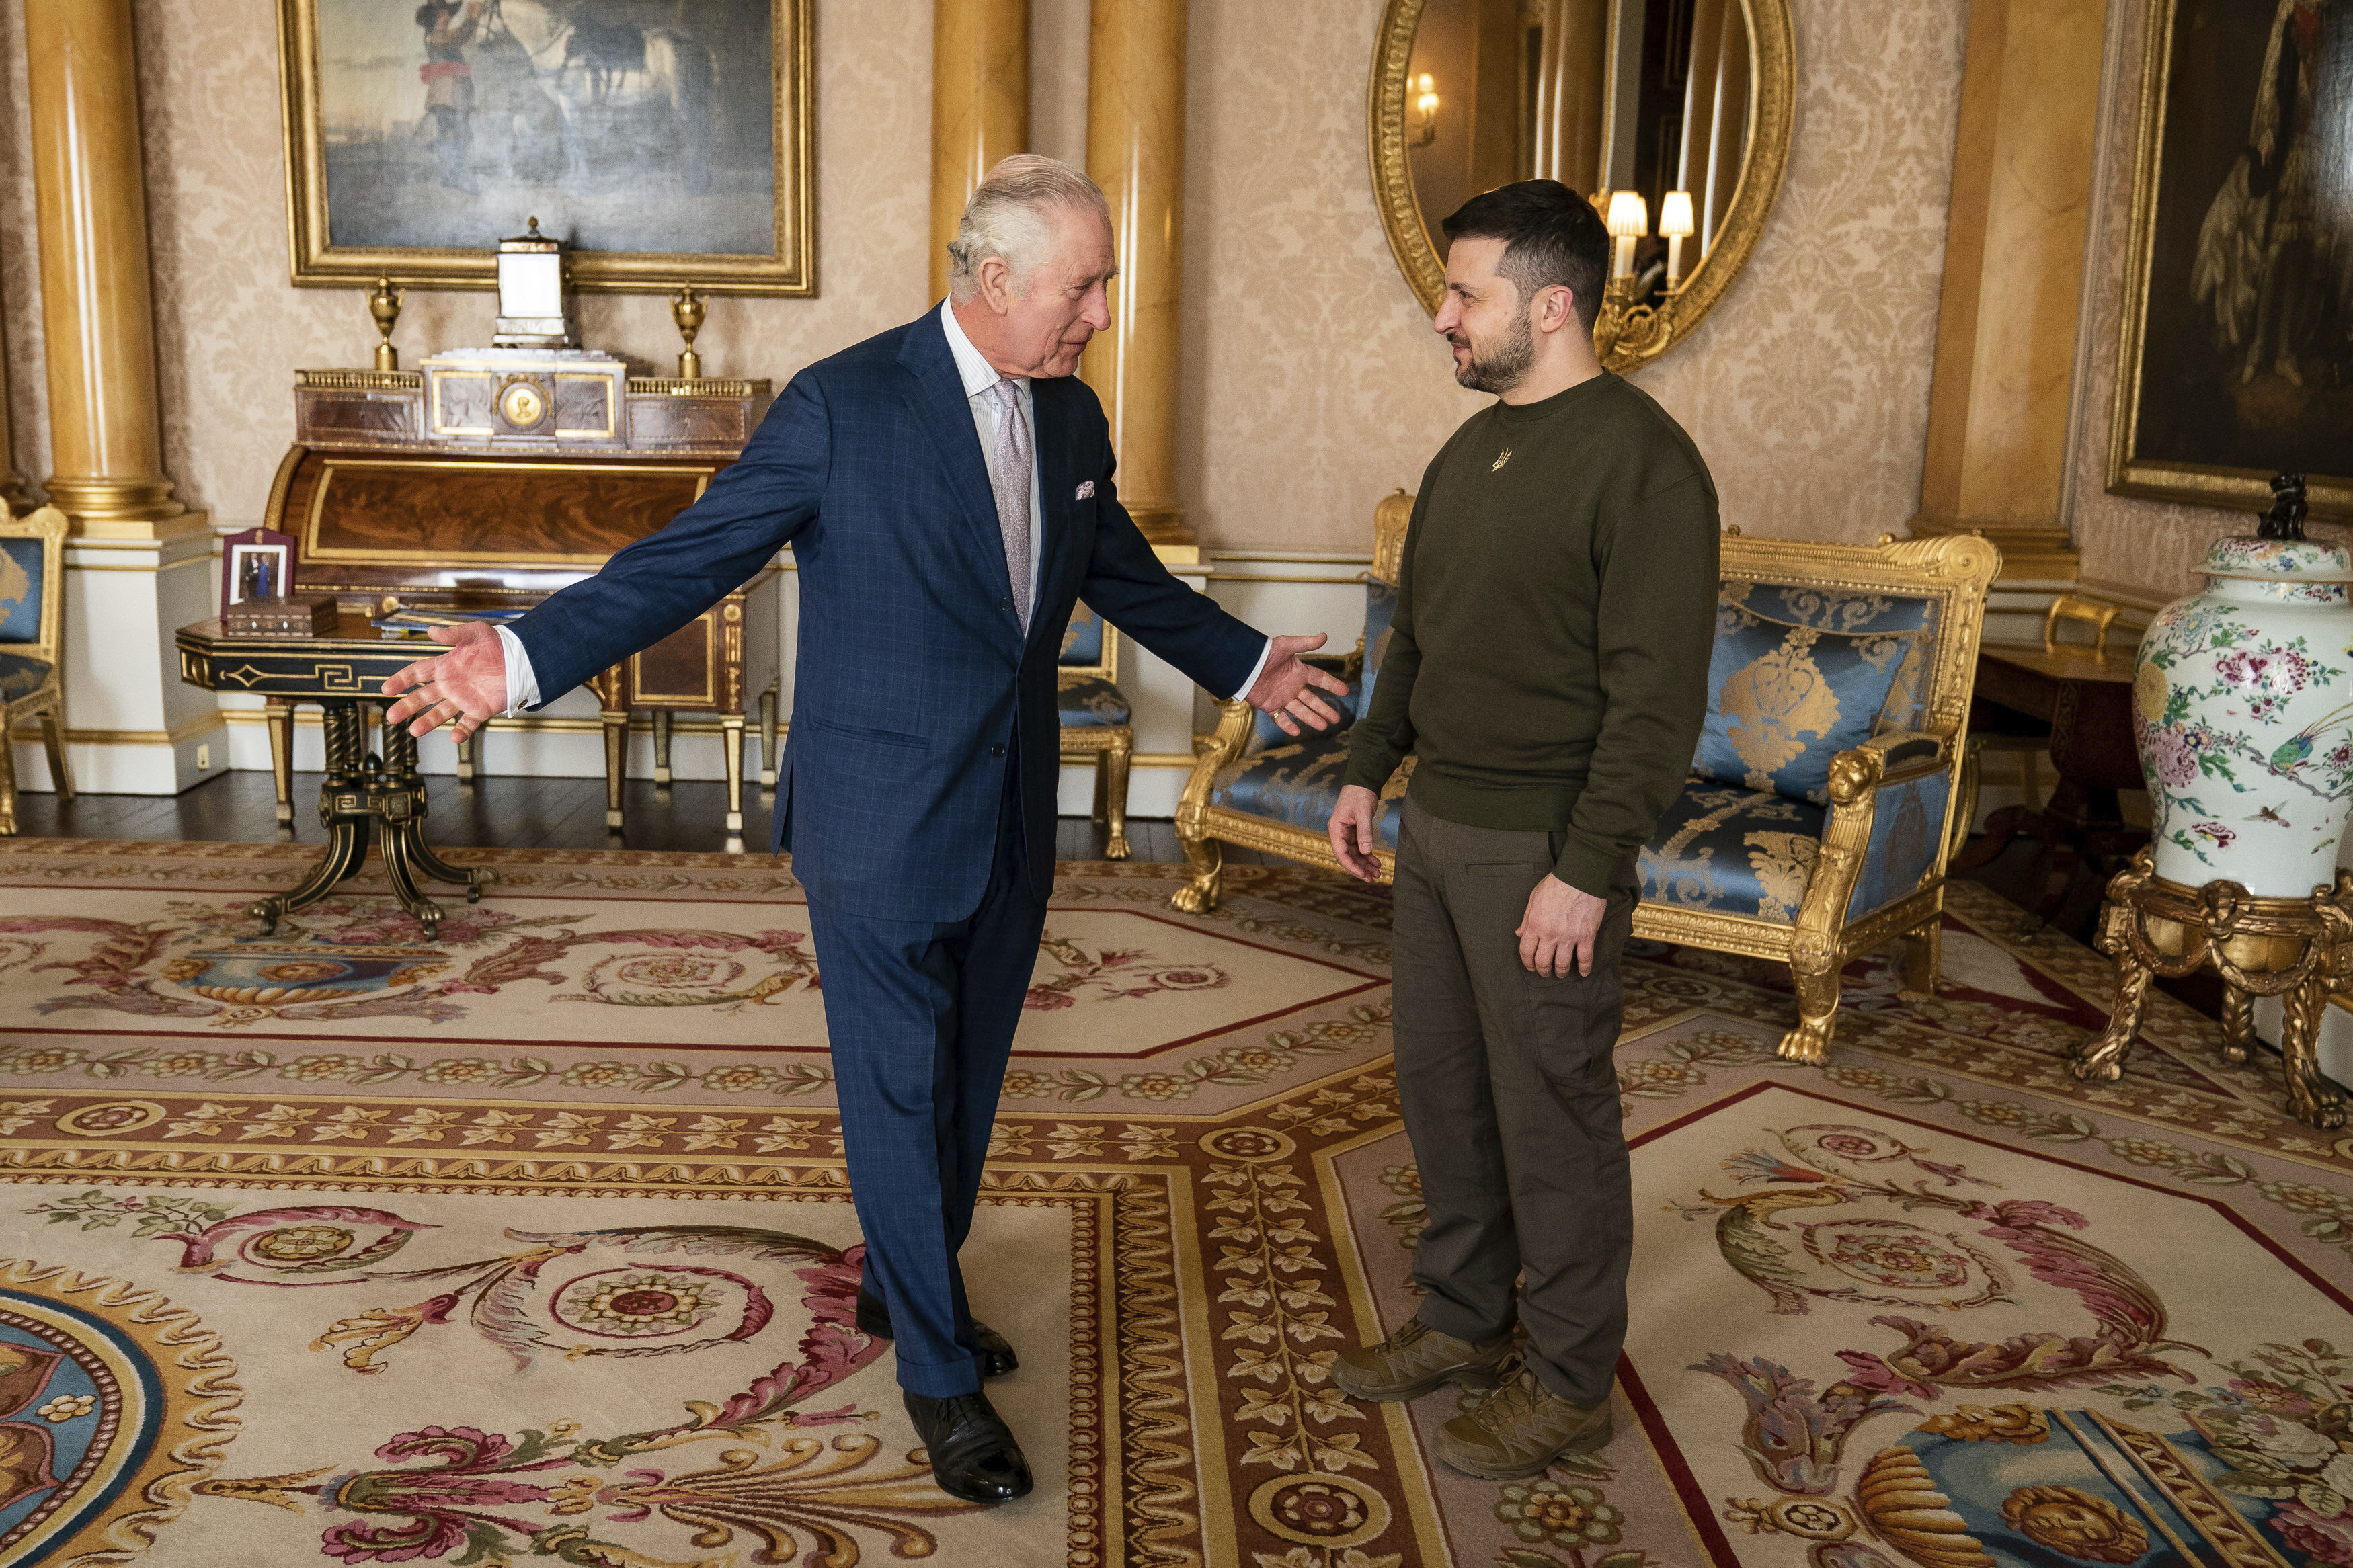 <p>King Charles III welcomed Ukraine's President Volodymyr Zelenskyy to Buckingham Palace in London on Feb. 8, 2023. It marked the Ukraine leader's first visit to the U.K. since Russia's war with his country began nearly a year earlier.</p>